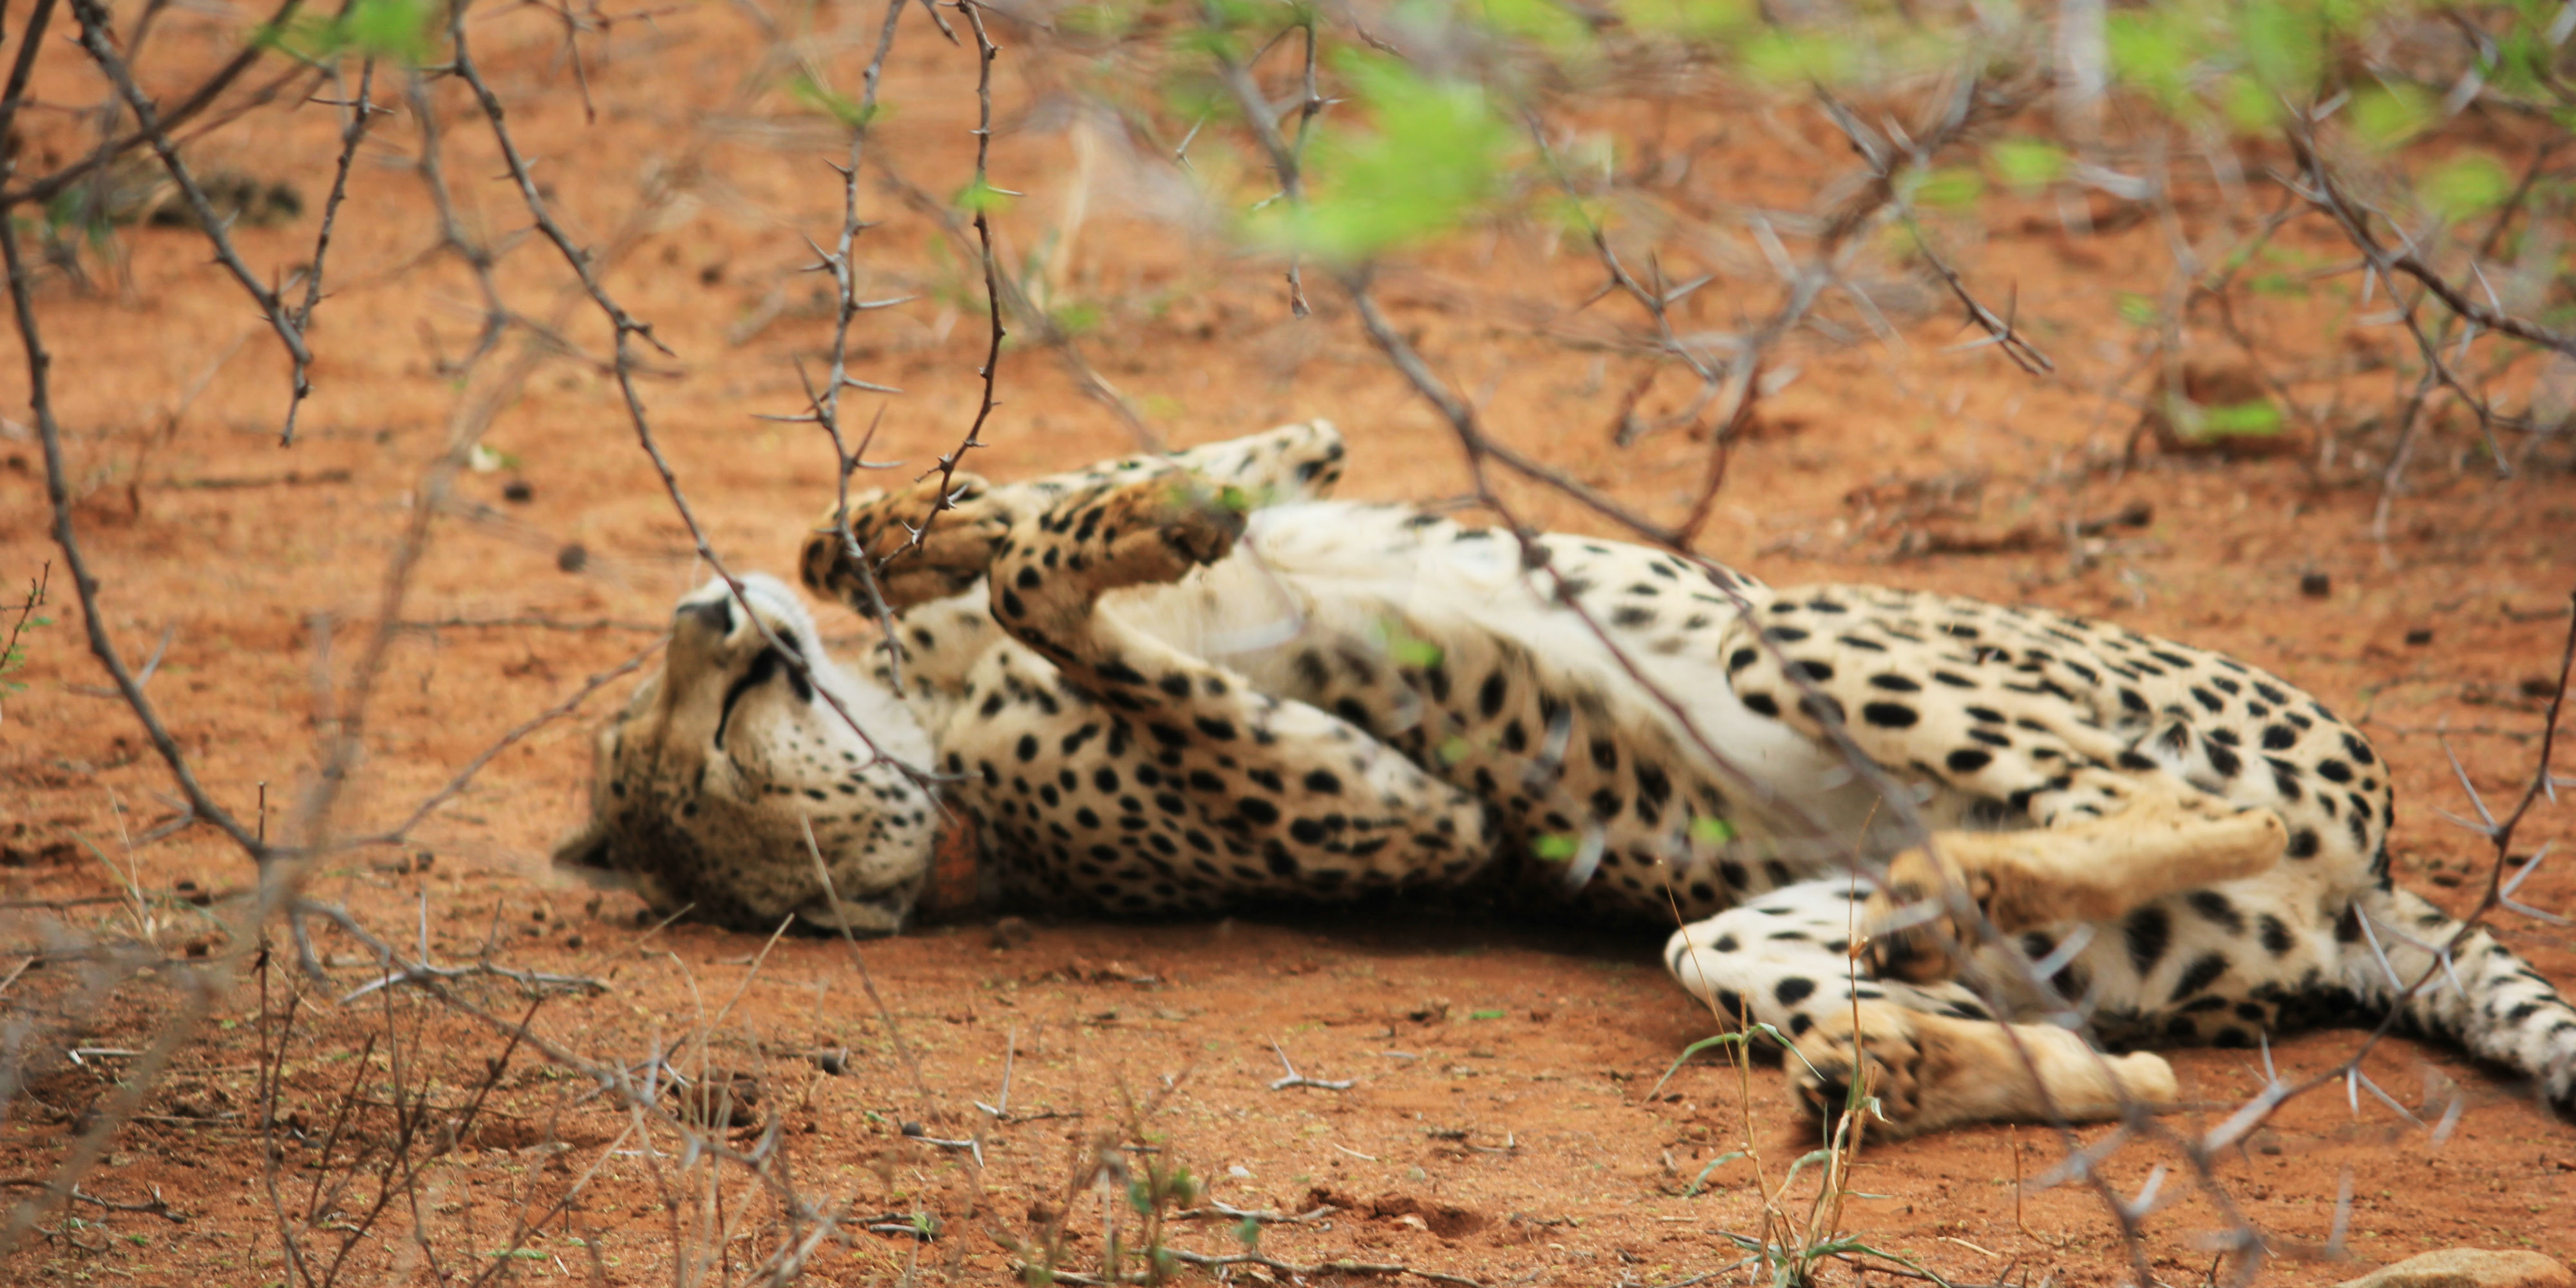 A South African cheetah female rubs her back in the soil.